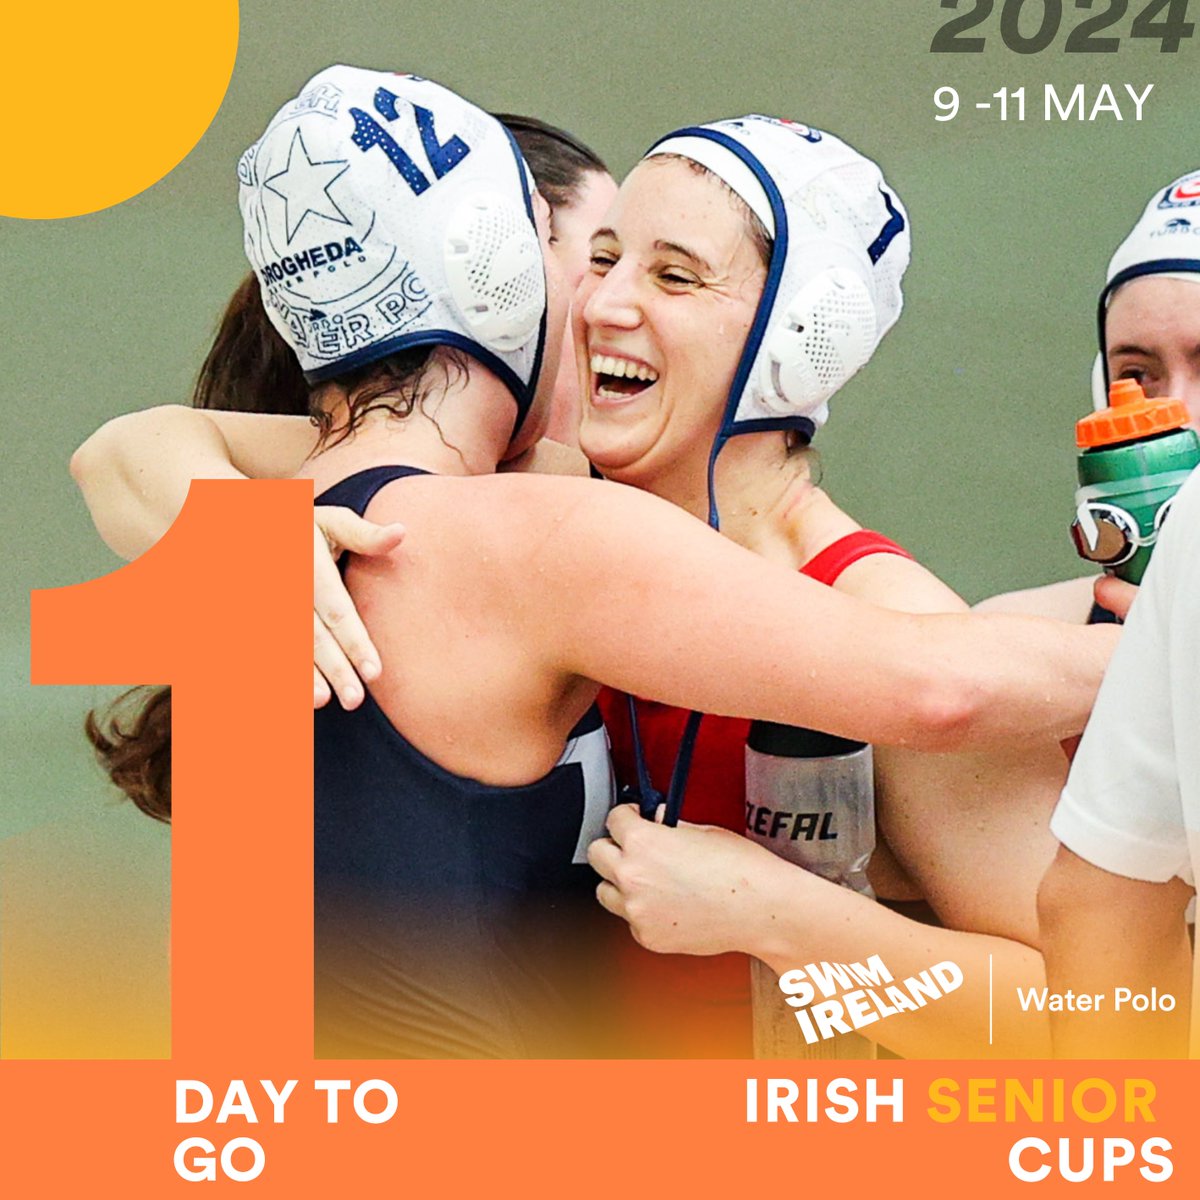 𝗢𝗡𝗘 𝗗𝗔𝗬 𝗧𝗢 𝗚𝗢! Bangor Aurora is the venue for the Irish Senior Cup for 2024 with action starting tomorrow until Saturday! Good luck to all teams this weekend!